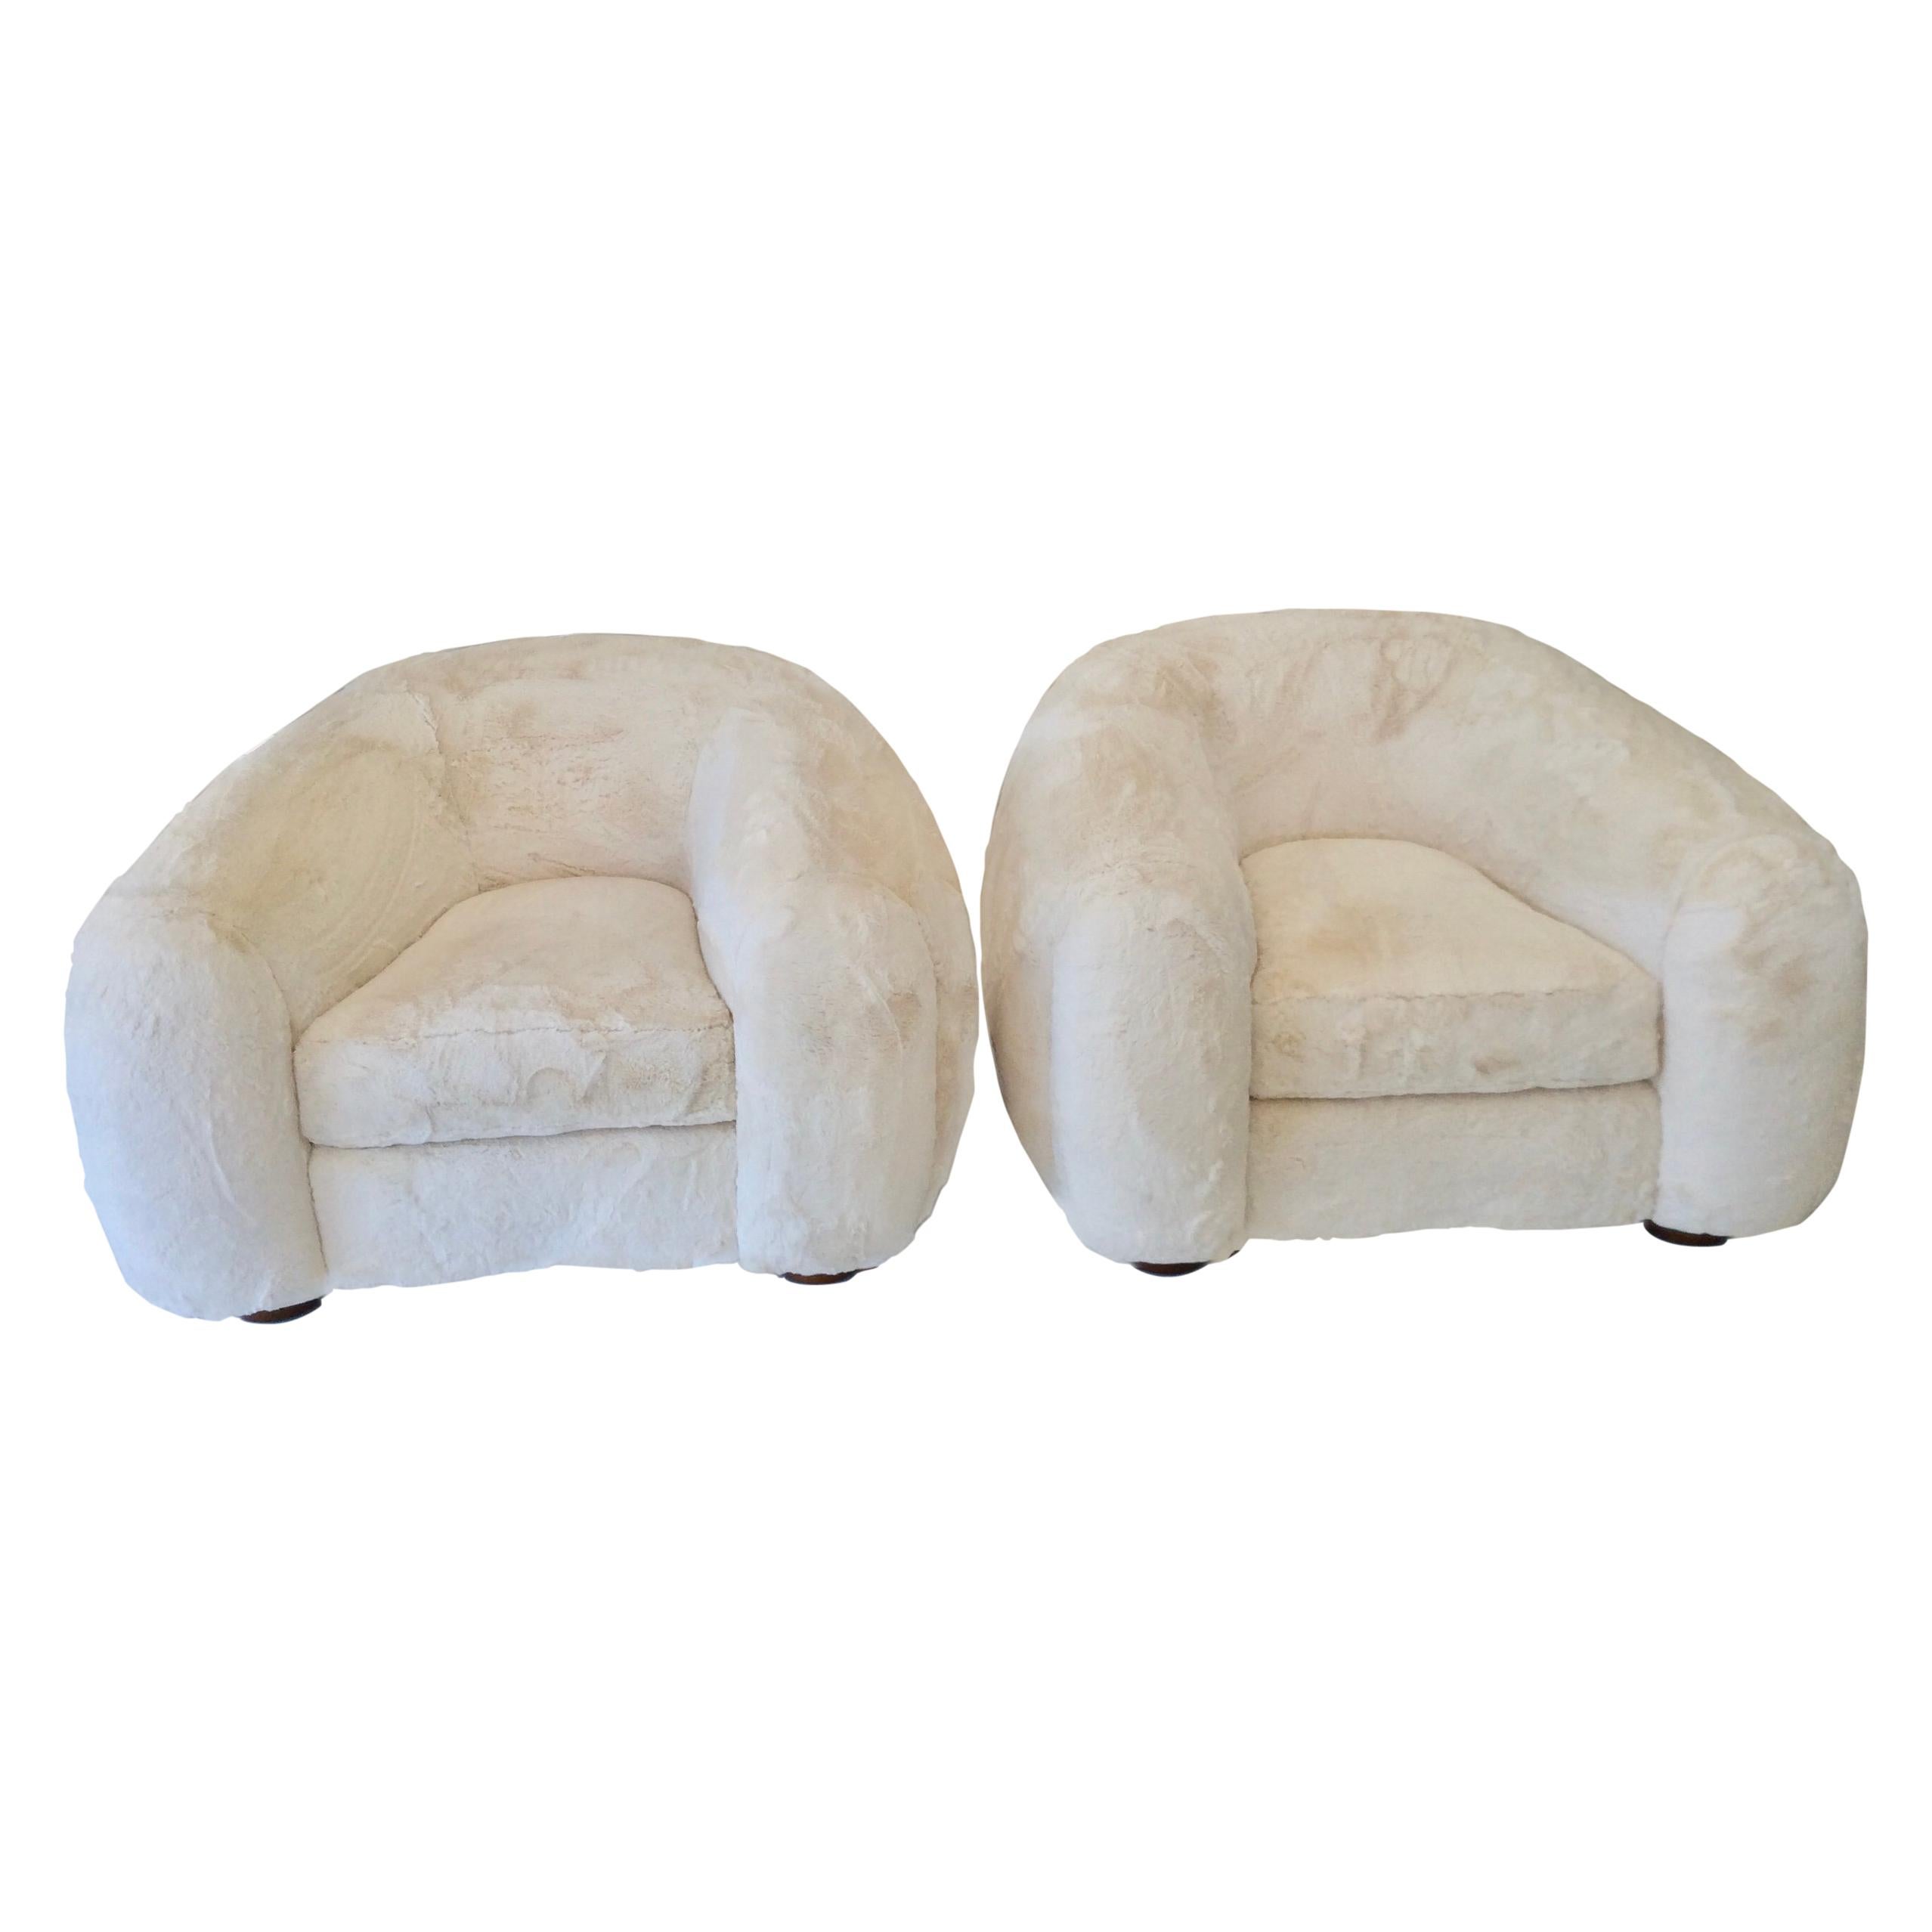 Gorgeous pair of Polar chairs, 1970s. Recently reupholstered with off-white organic sheep skin.
Provenance: France, private collection.